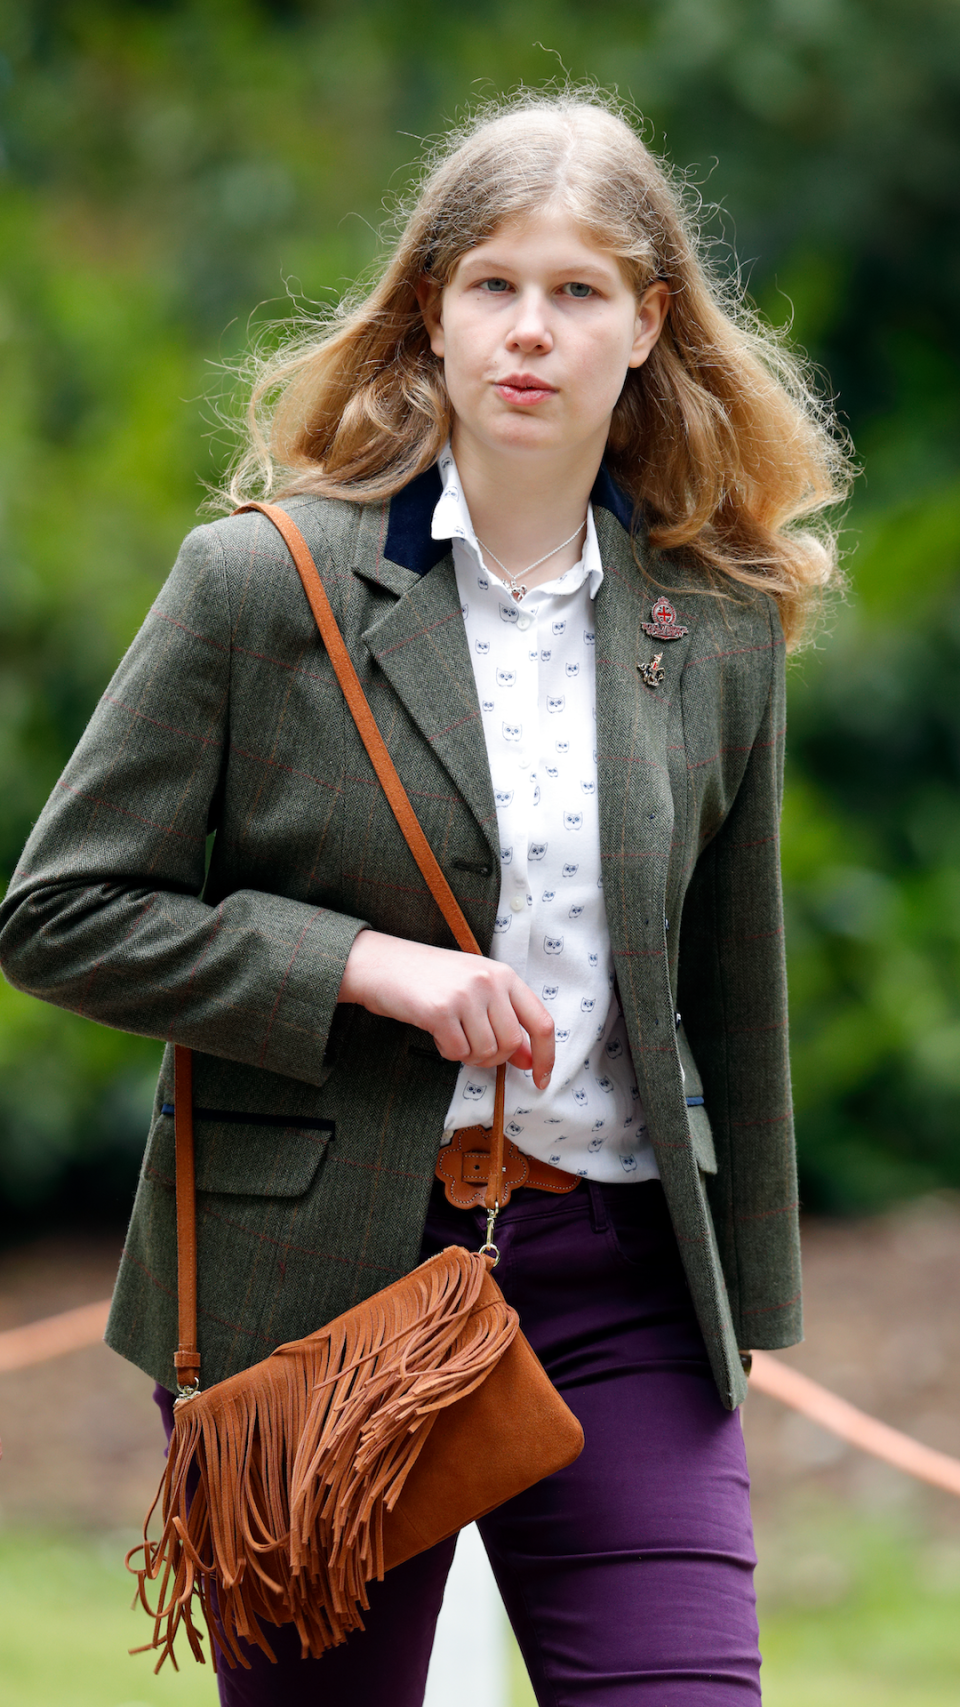 <p> Prince Edward and Sophie, Duchess of Cambridge's daughter Lady Louise Windsor was one of Queen Elizabeth's youngest grandchildren. She was seen as a teen attending the Royal Windsor Horse Show in 2018. </p>